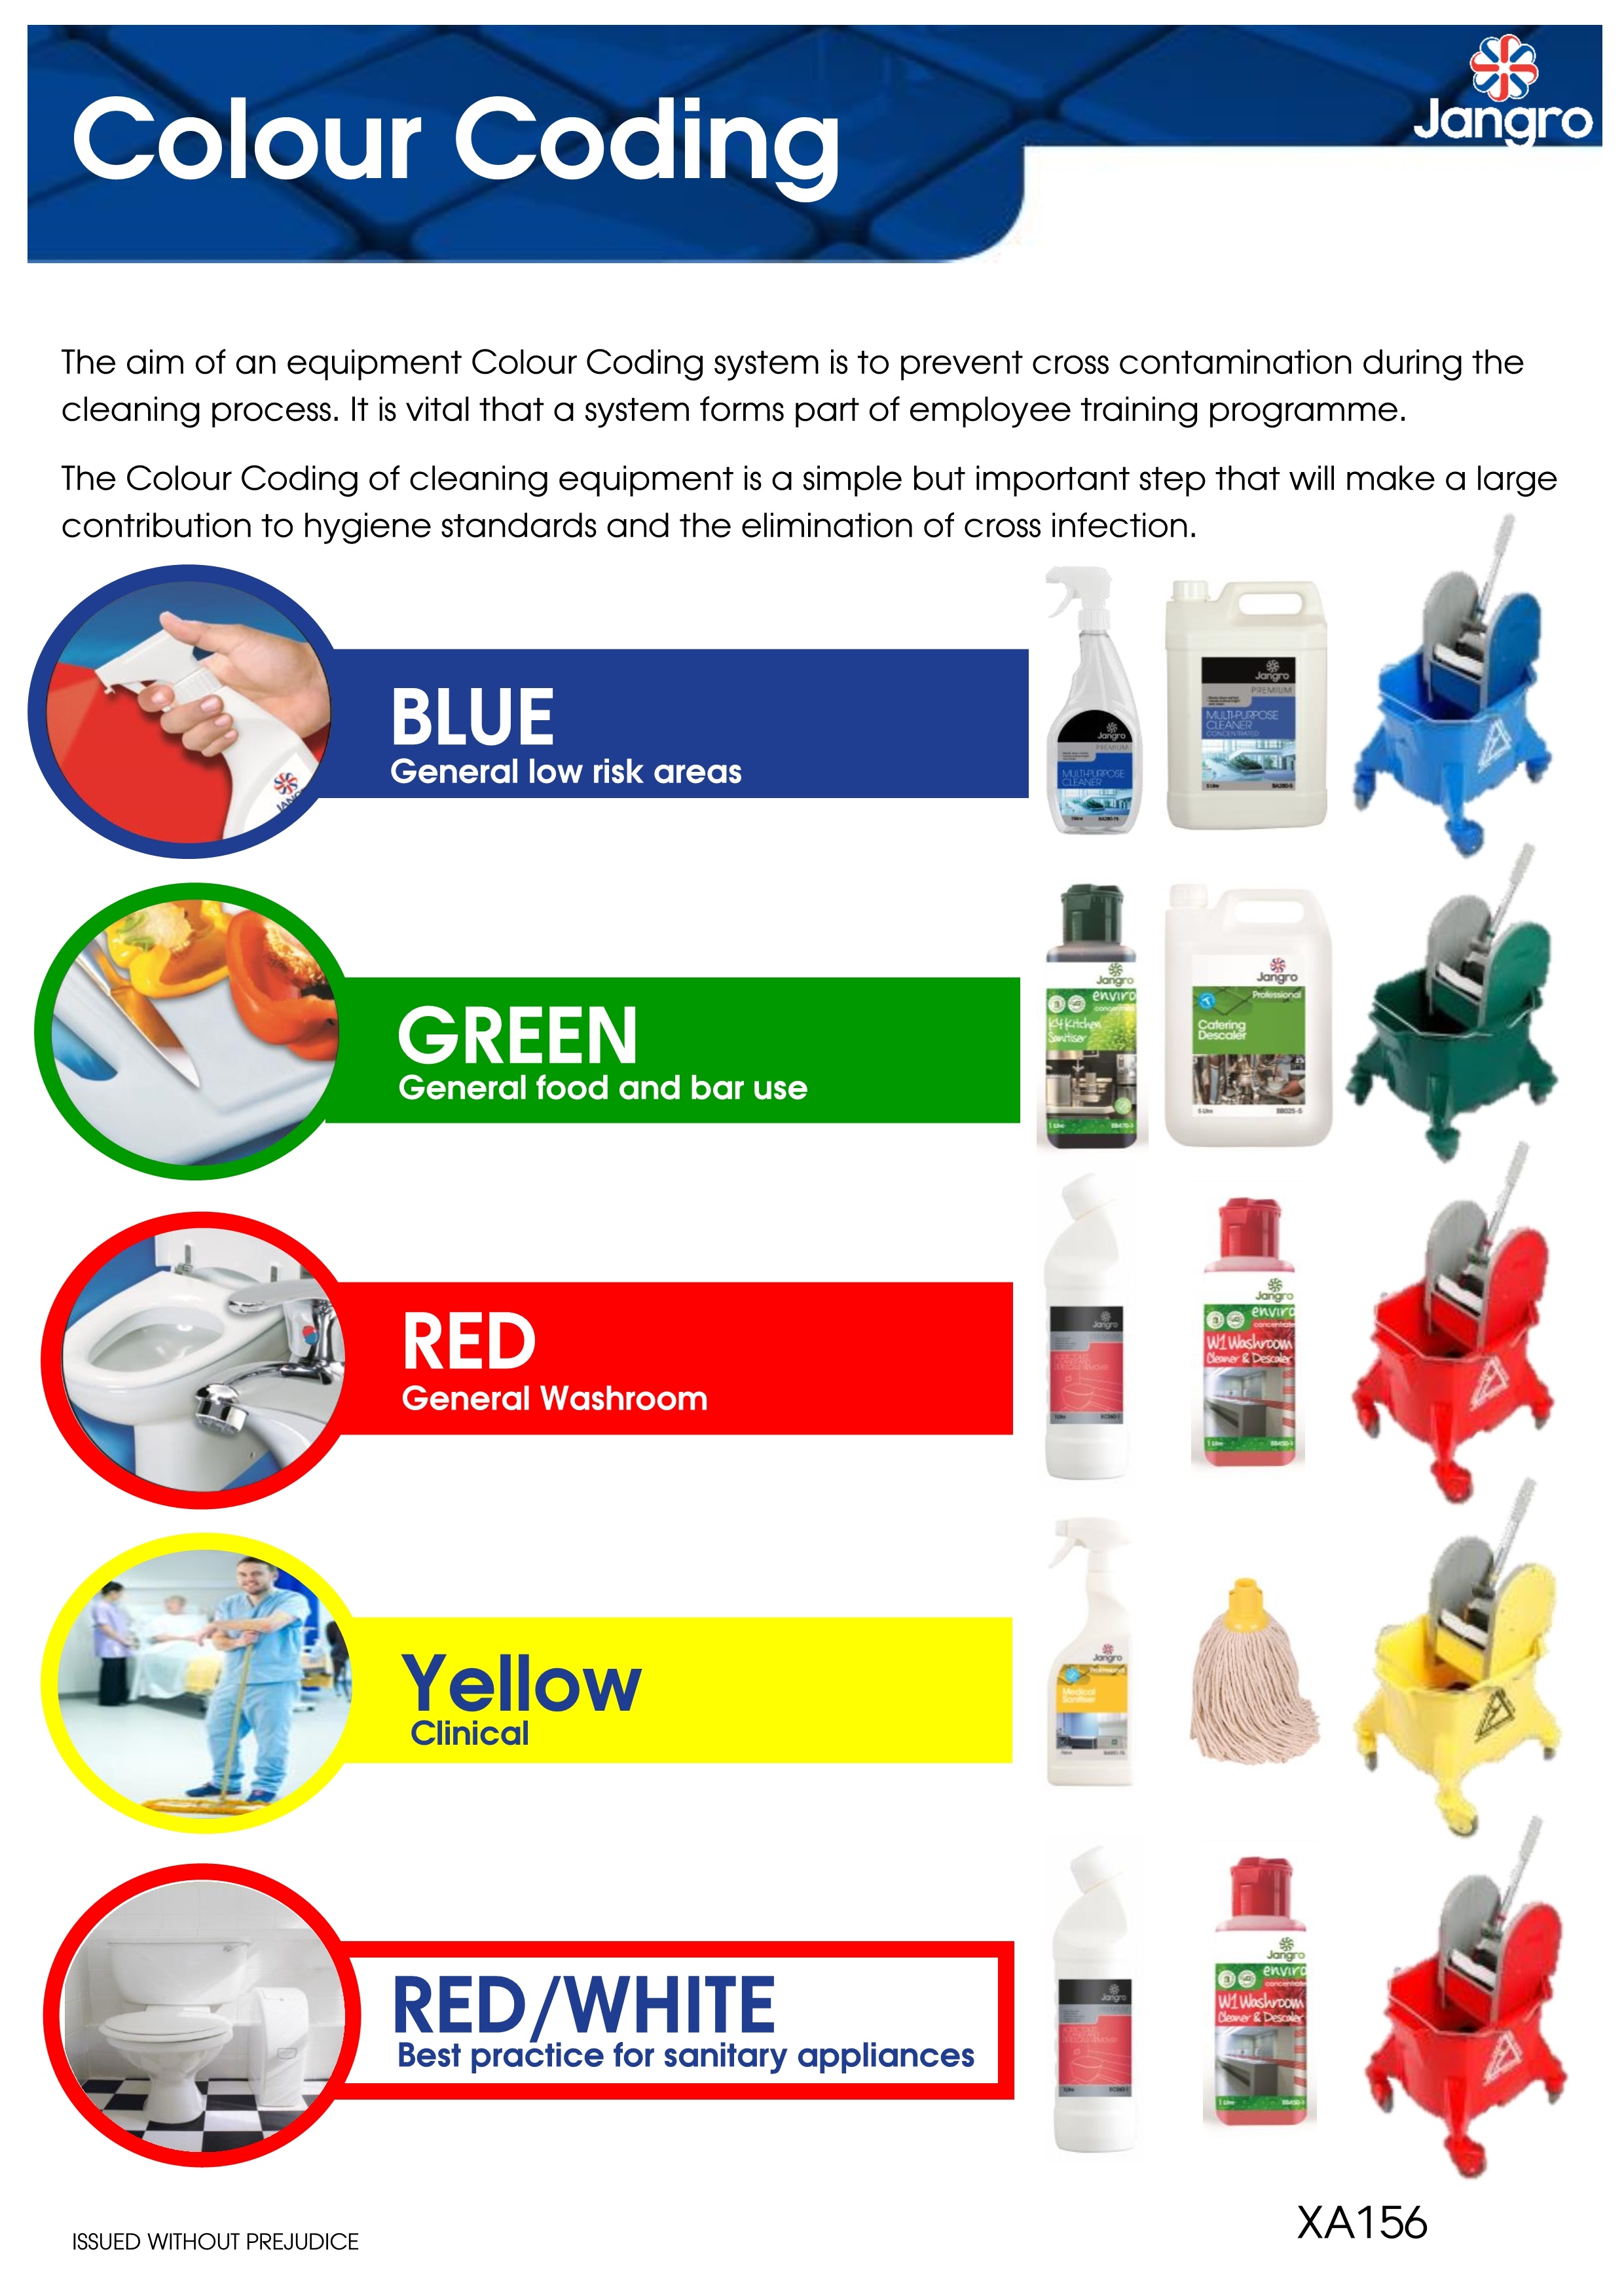 A Colour Coding System and Infection Control for Cleaners